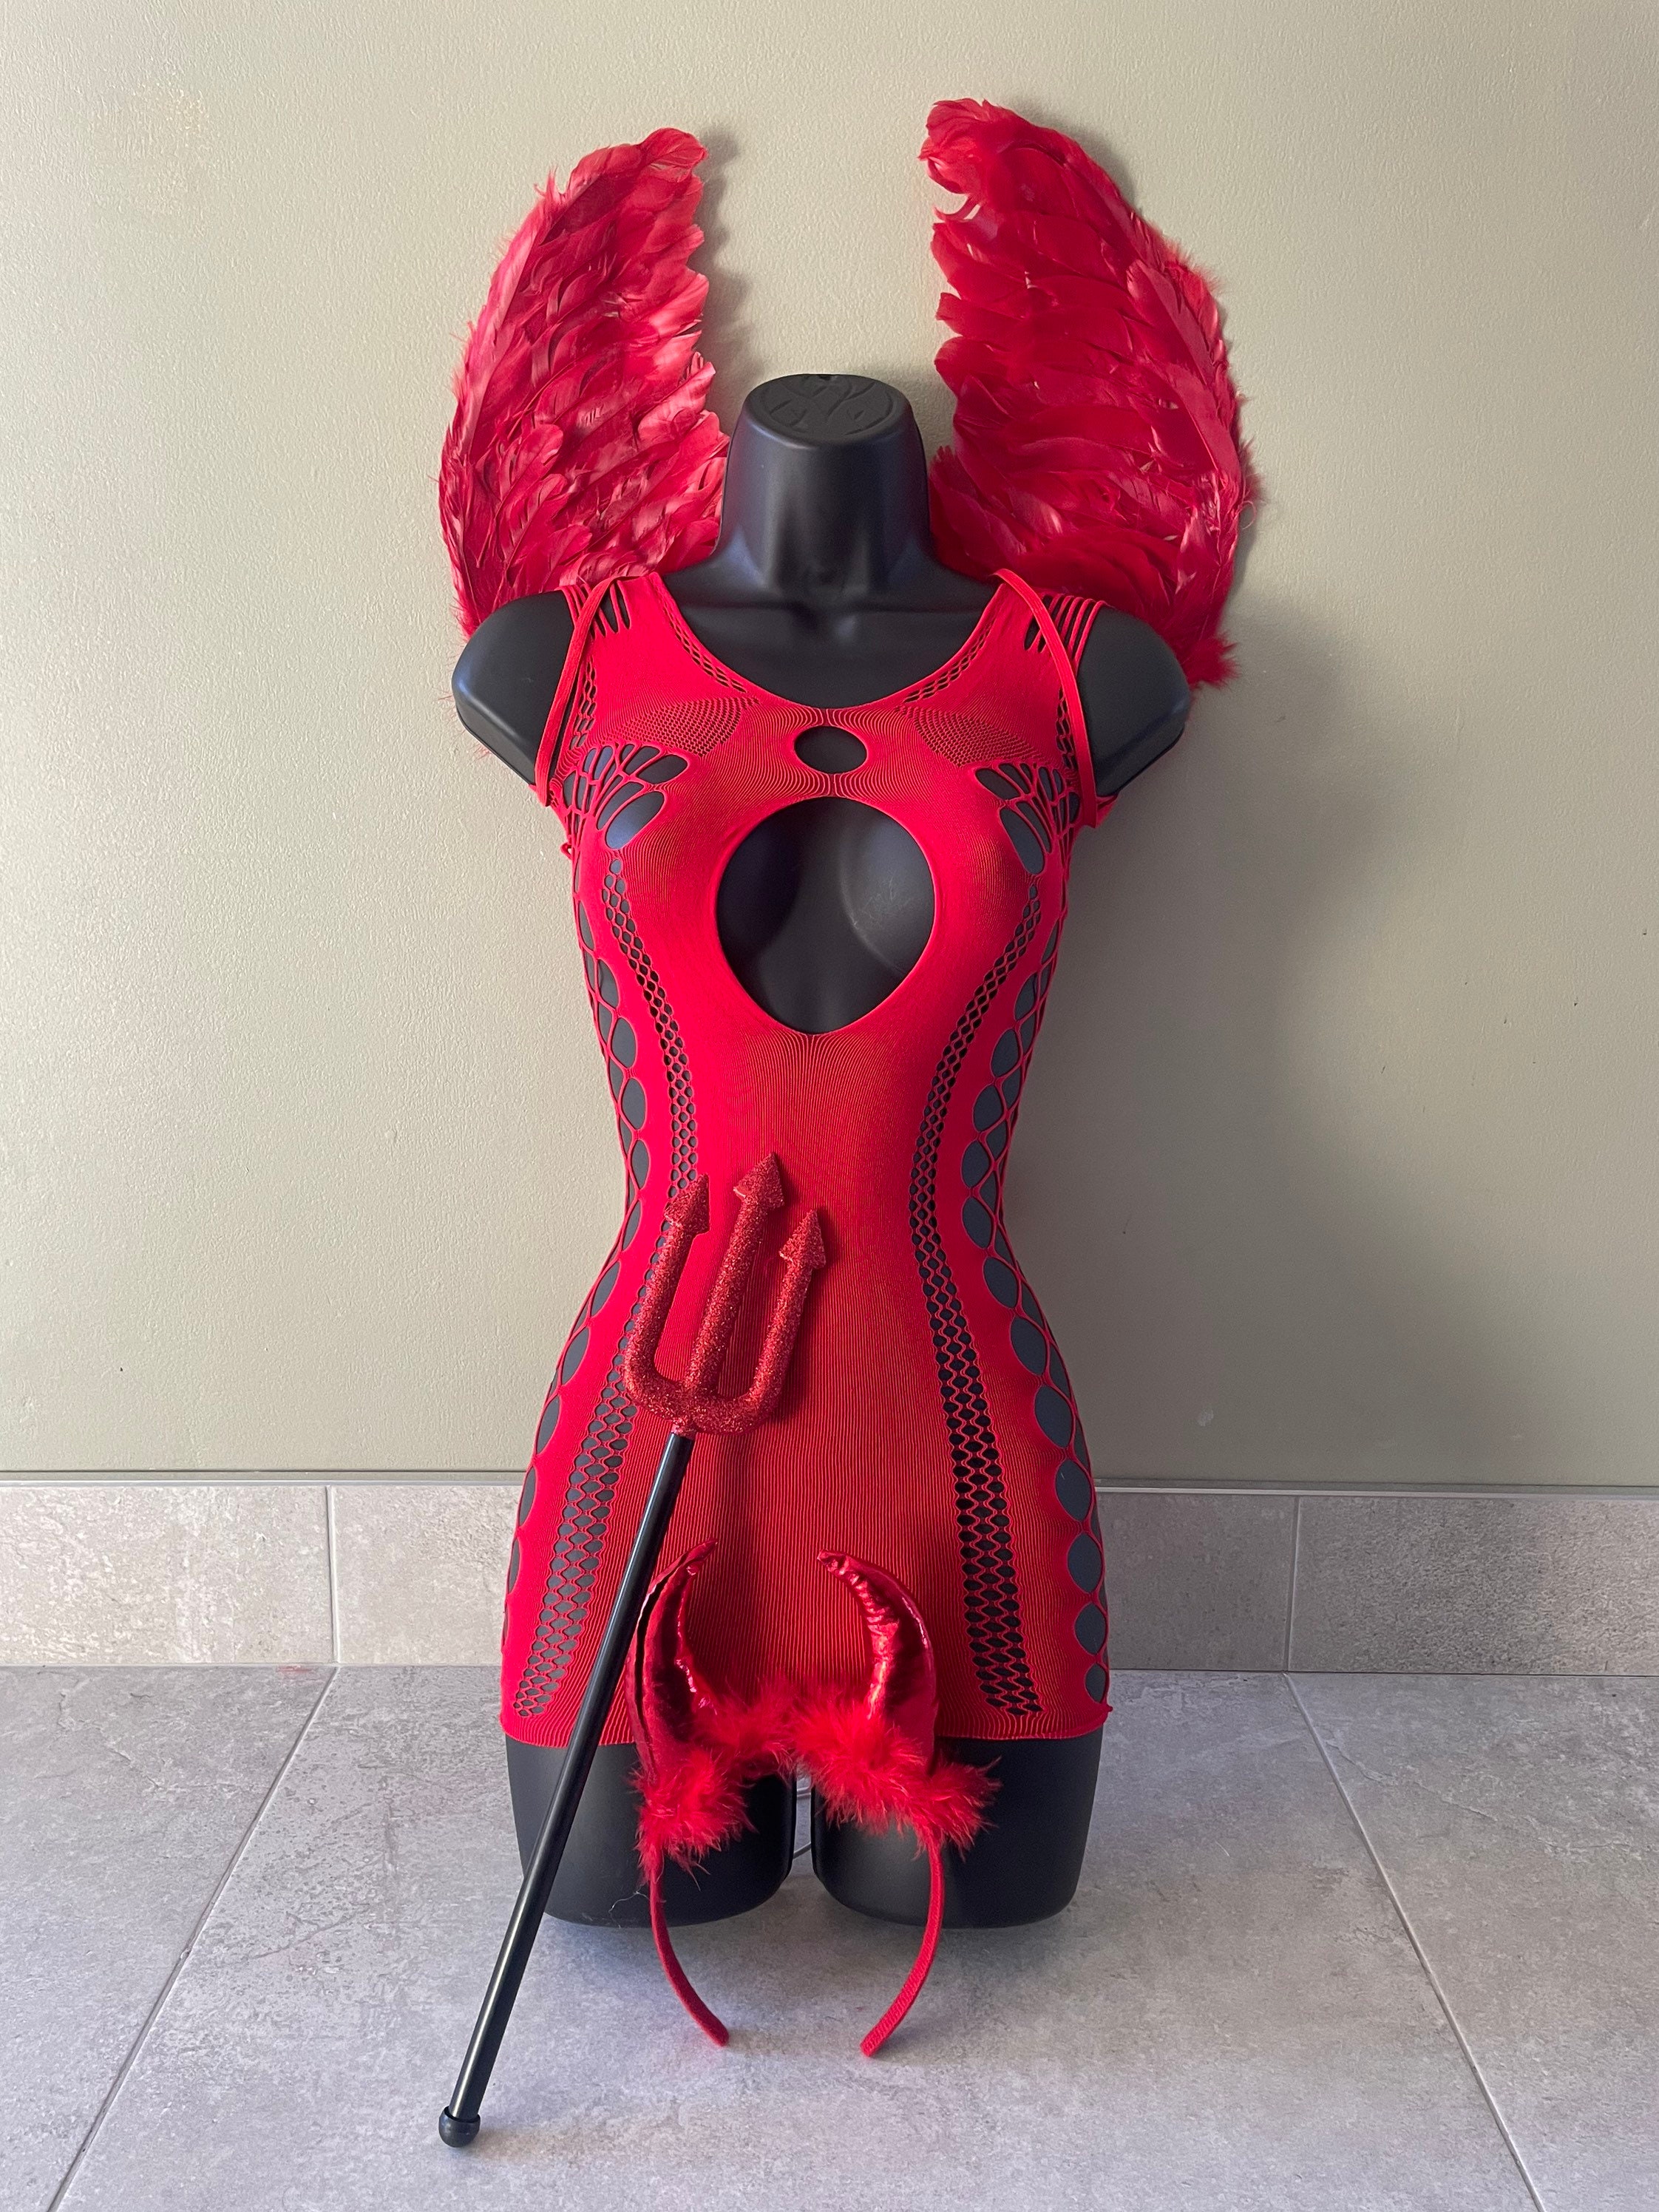 home made devil costumes for adults Porn Photos Hd